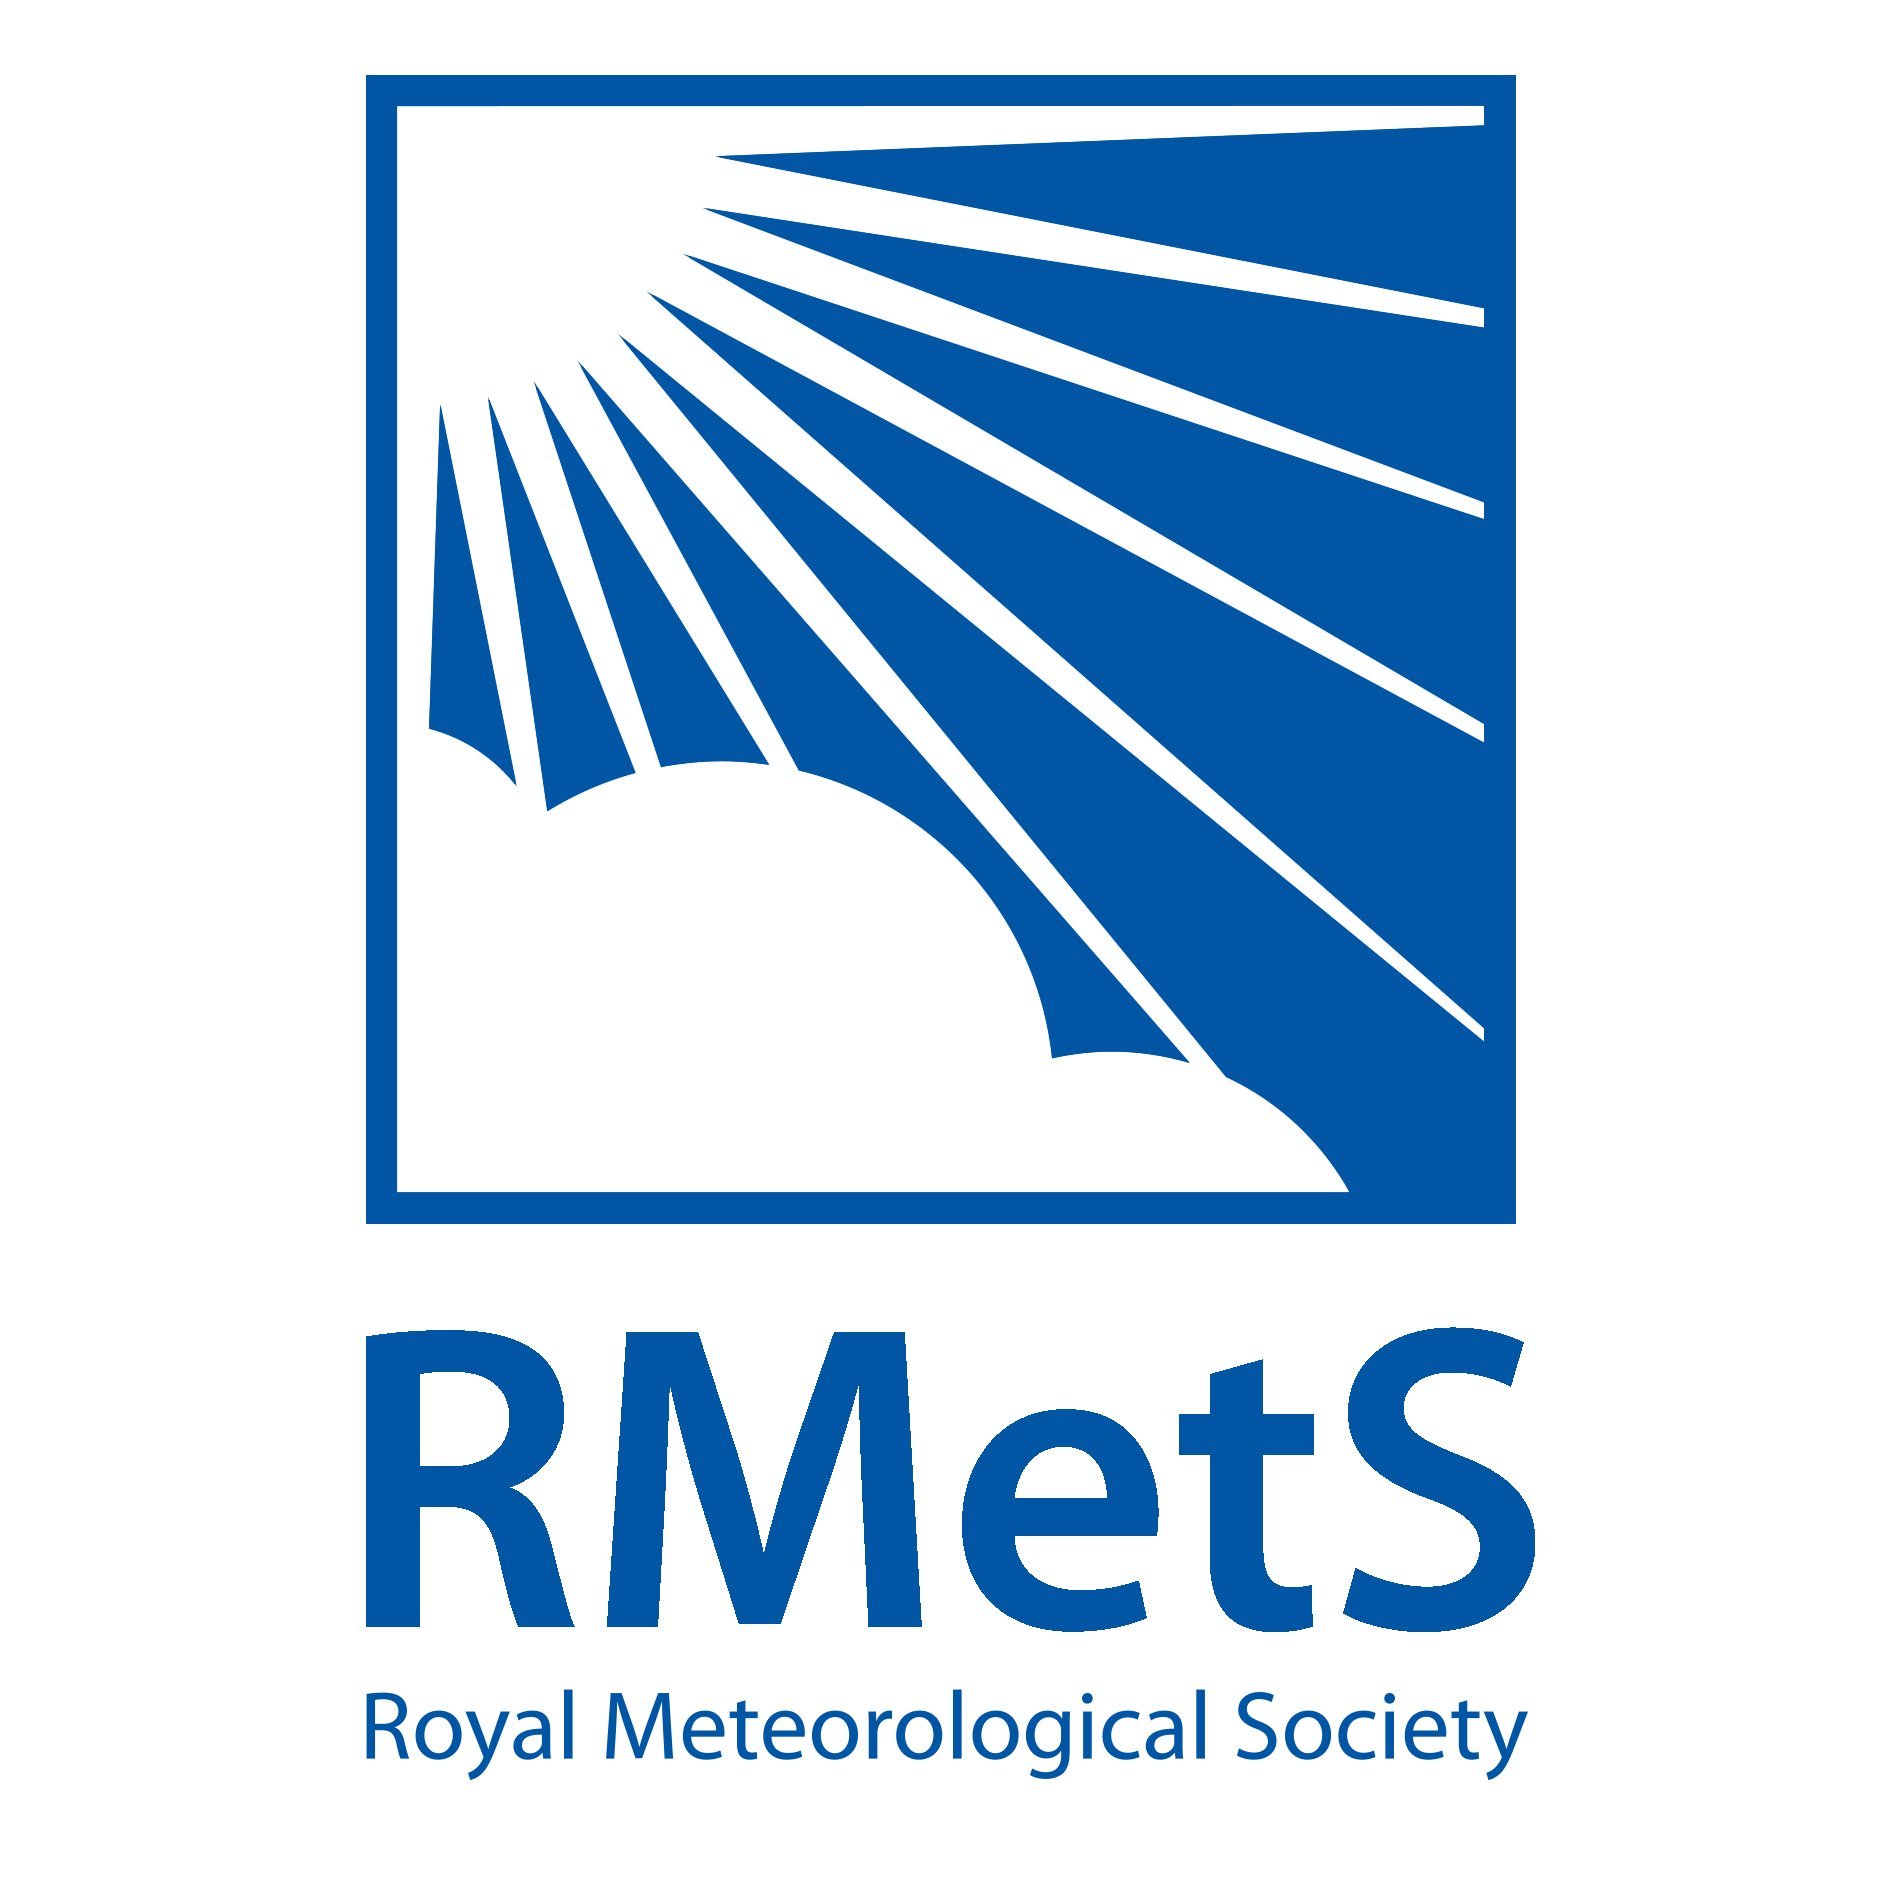 News and upcoming meetings from the @RMetS South East Local Centre. Meetings are held at @UniRdg_Met.